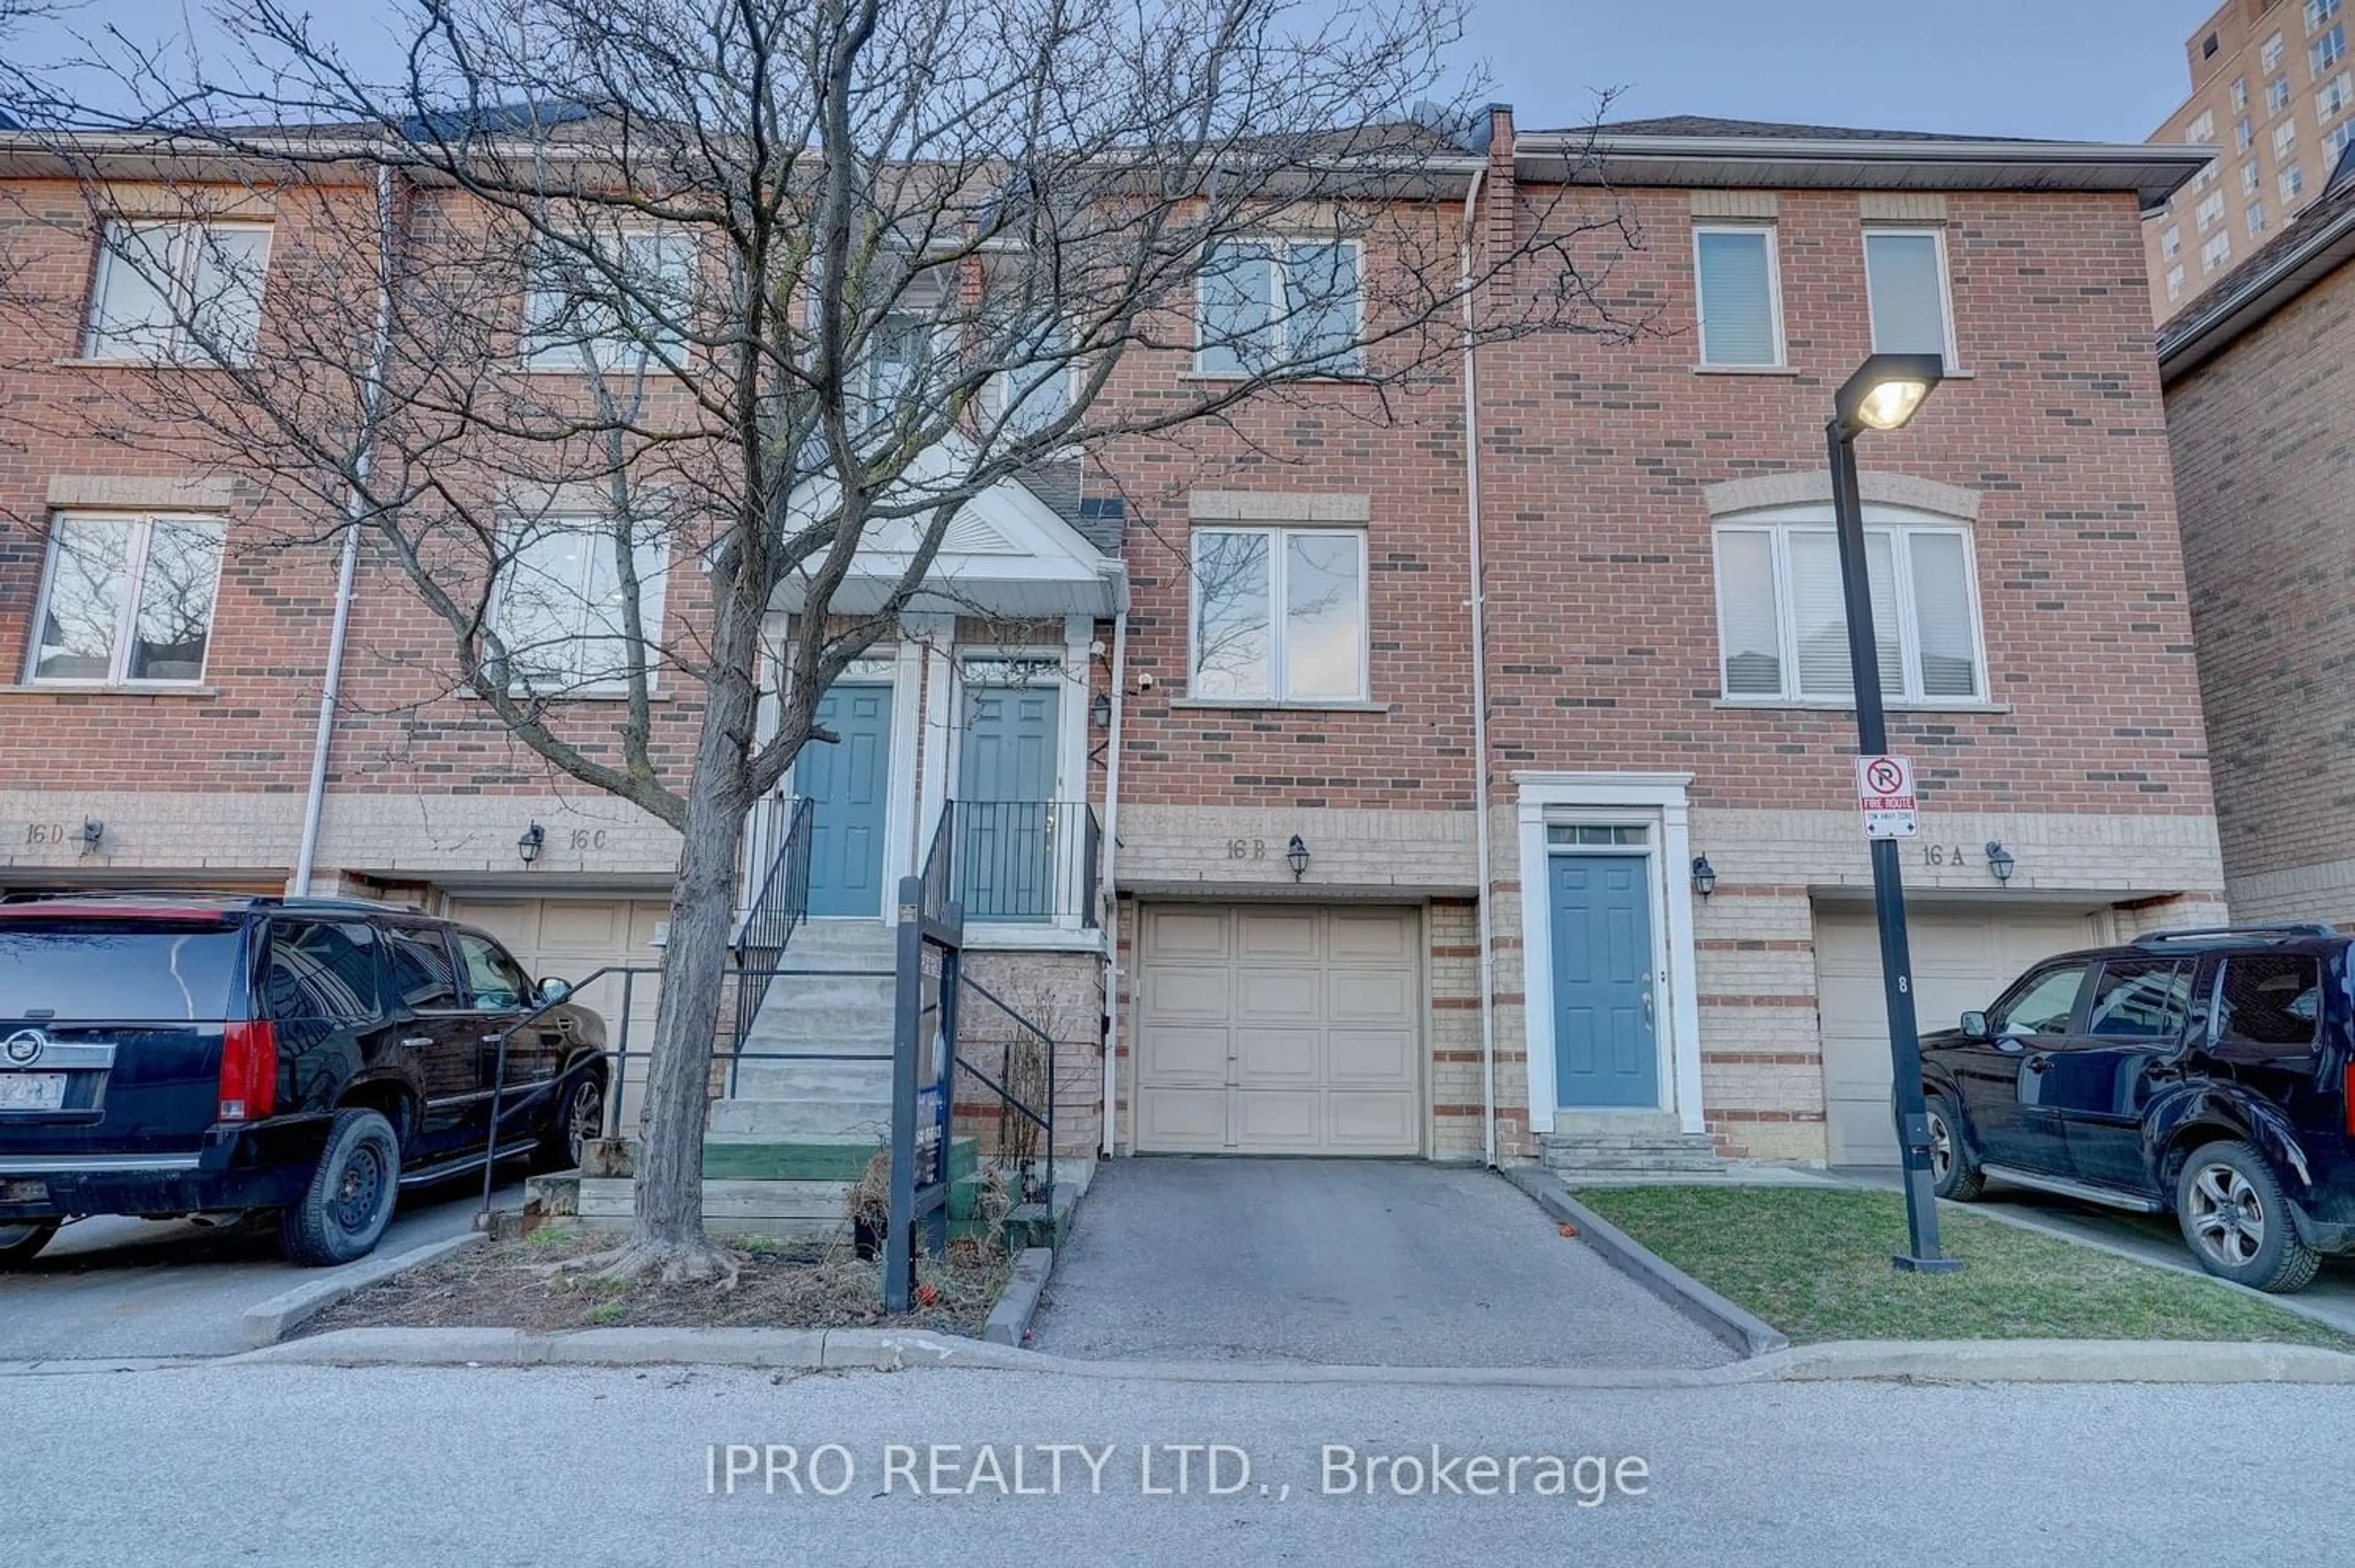 Home with unknown exterior material for 16B Leaside Park Dr, Toronto Ontario M4H 1R2